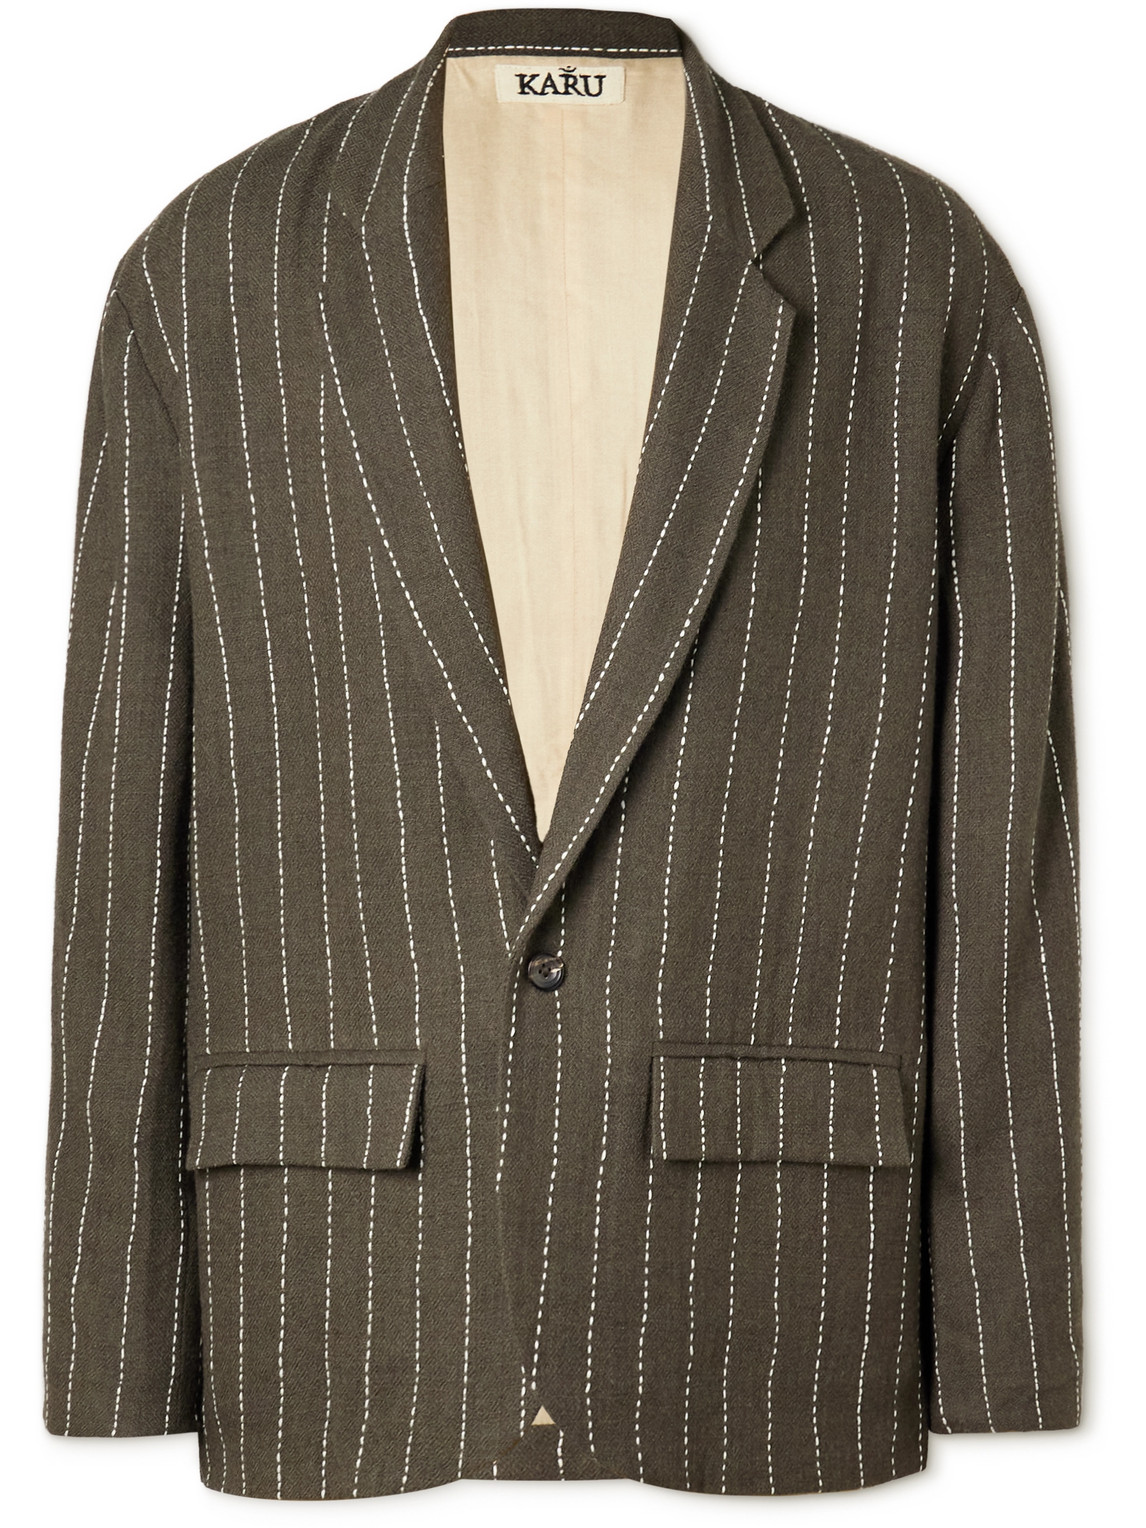 Karu Research Unstructured Embroidered Pinstriped Wool Blazer In Olive White